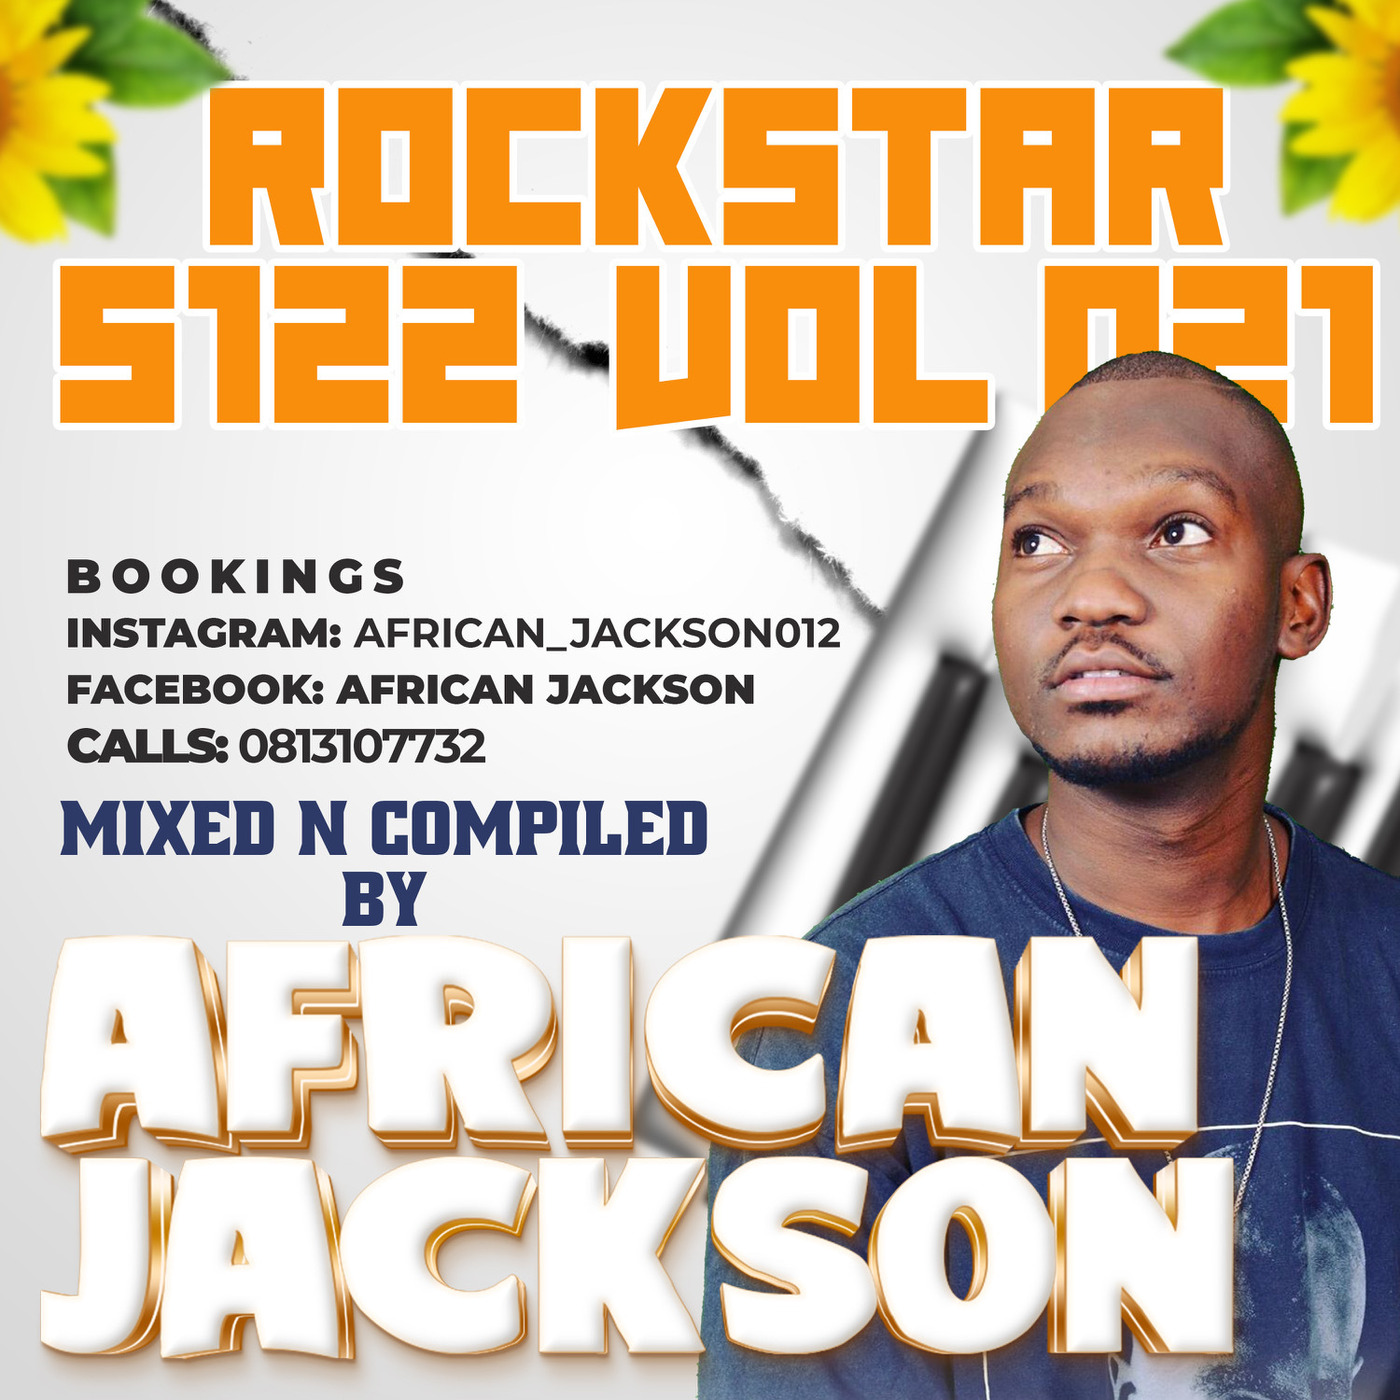 Rockstar 5122 Vol 021 Mixed and Compiled By African Jackson